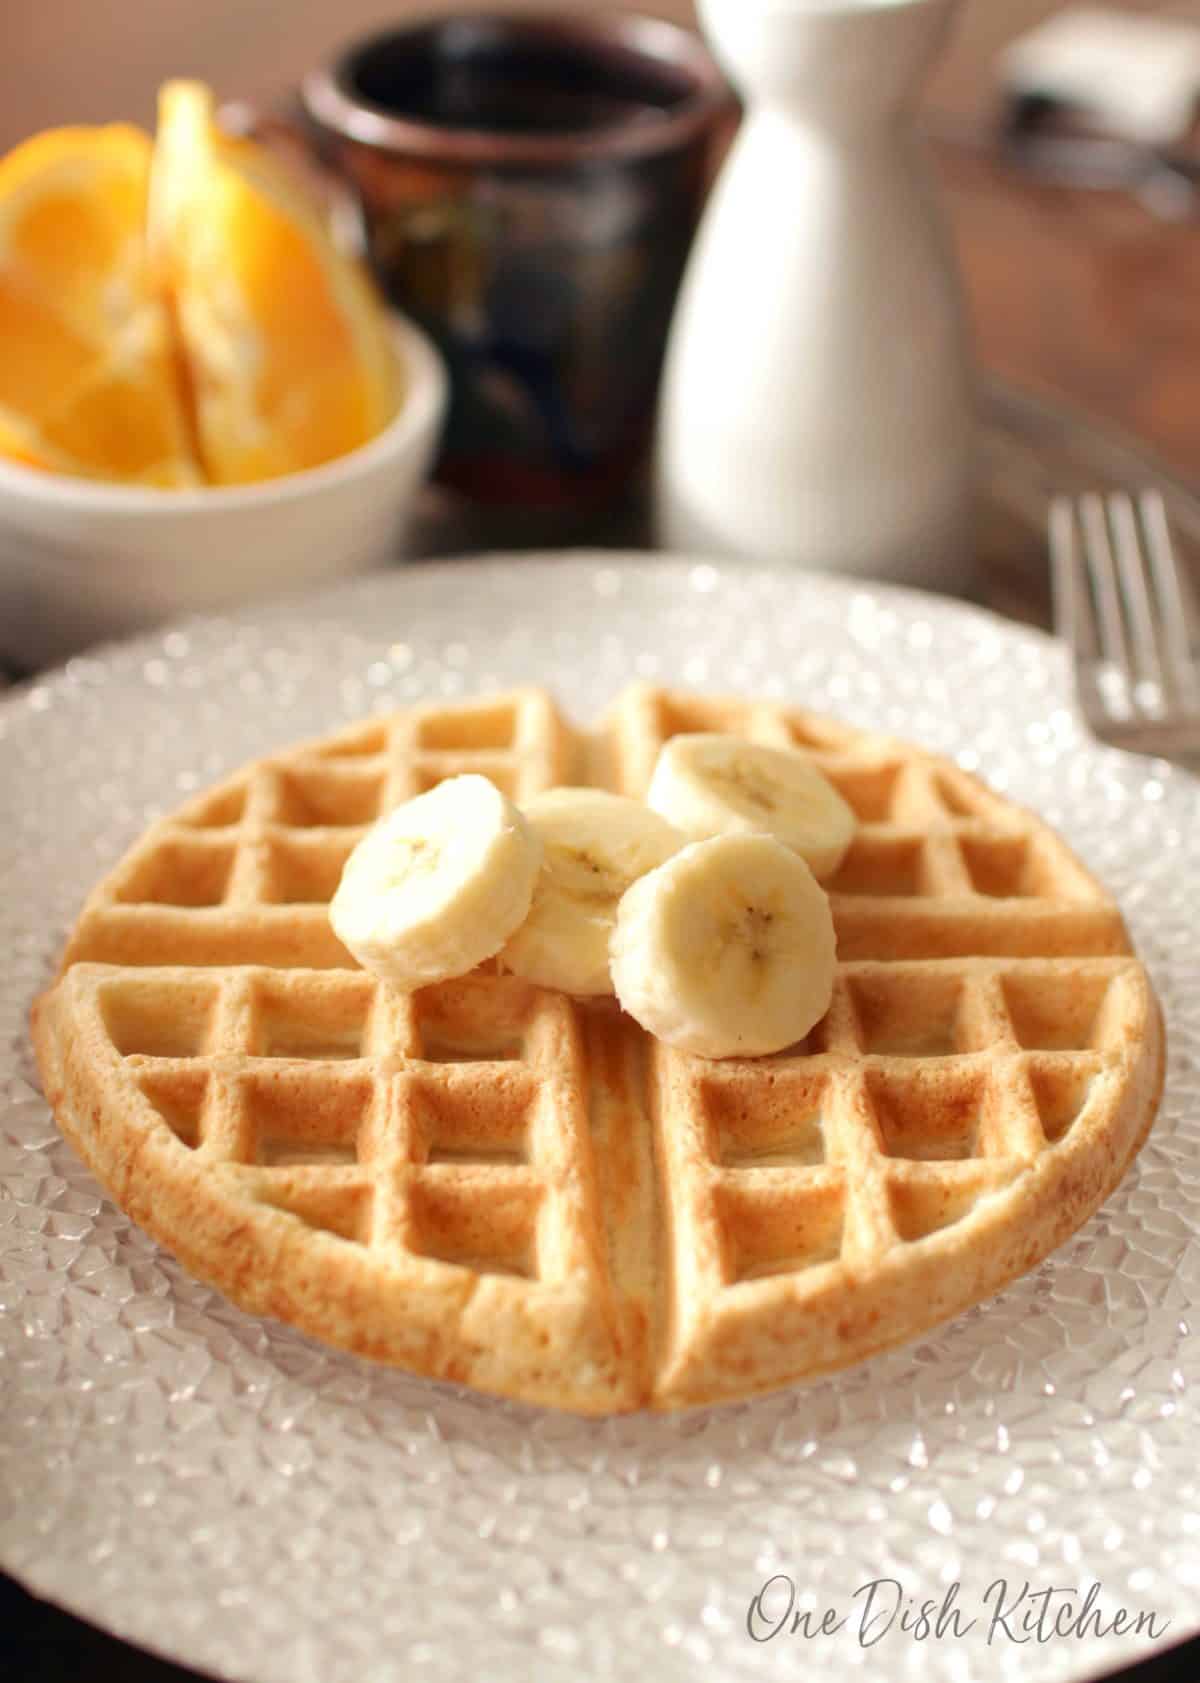 A waffle topped with banana slices on a large plate with a mug of coffee and orange slices in the background.